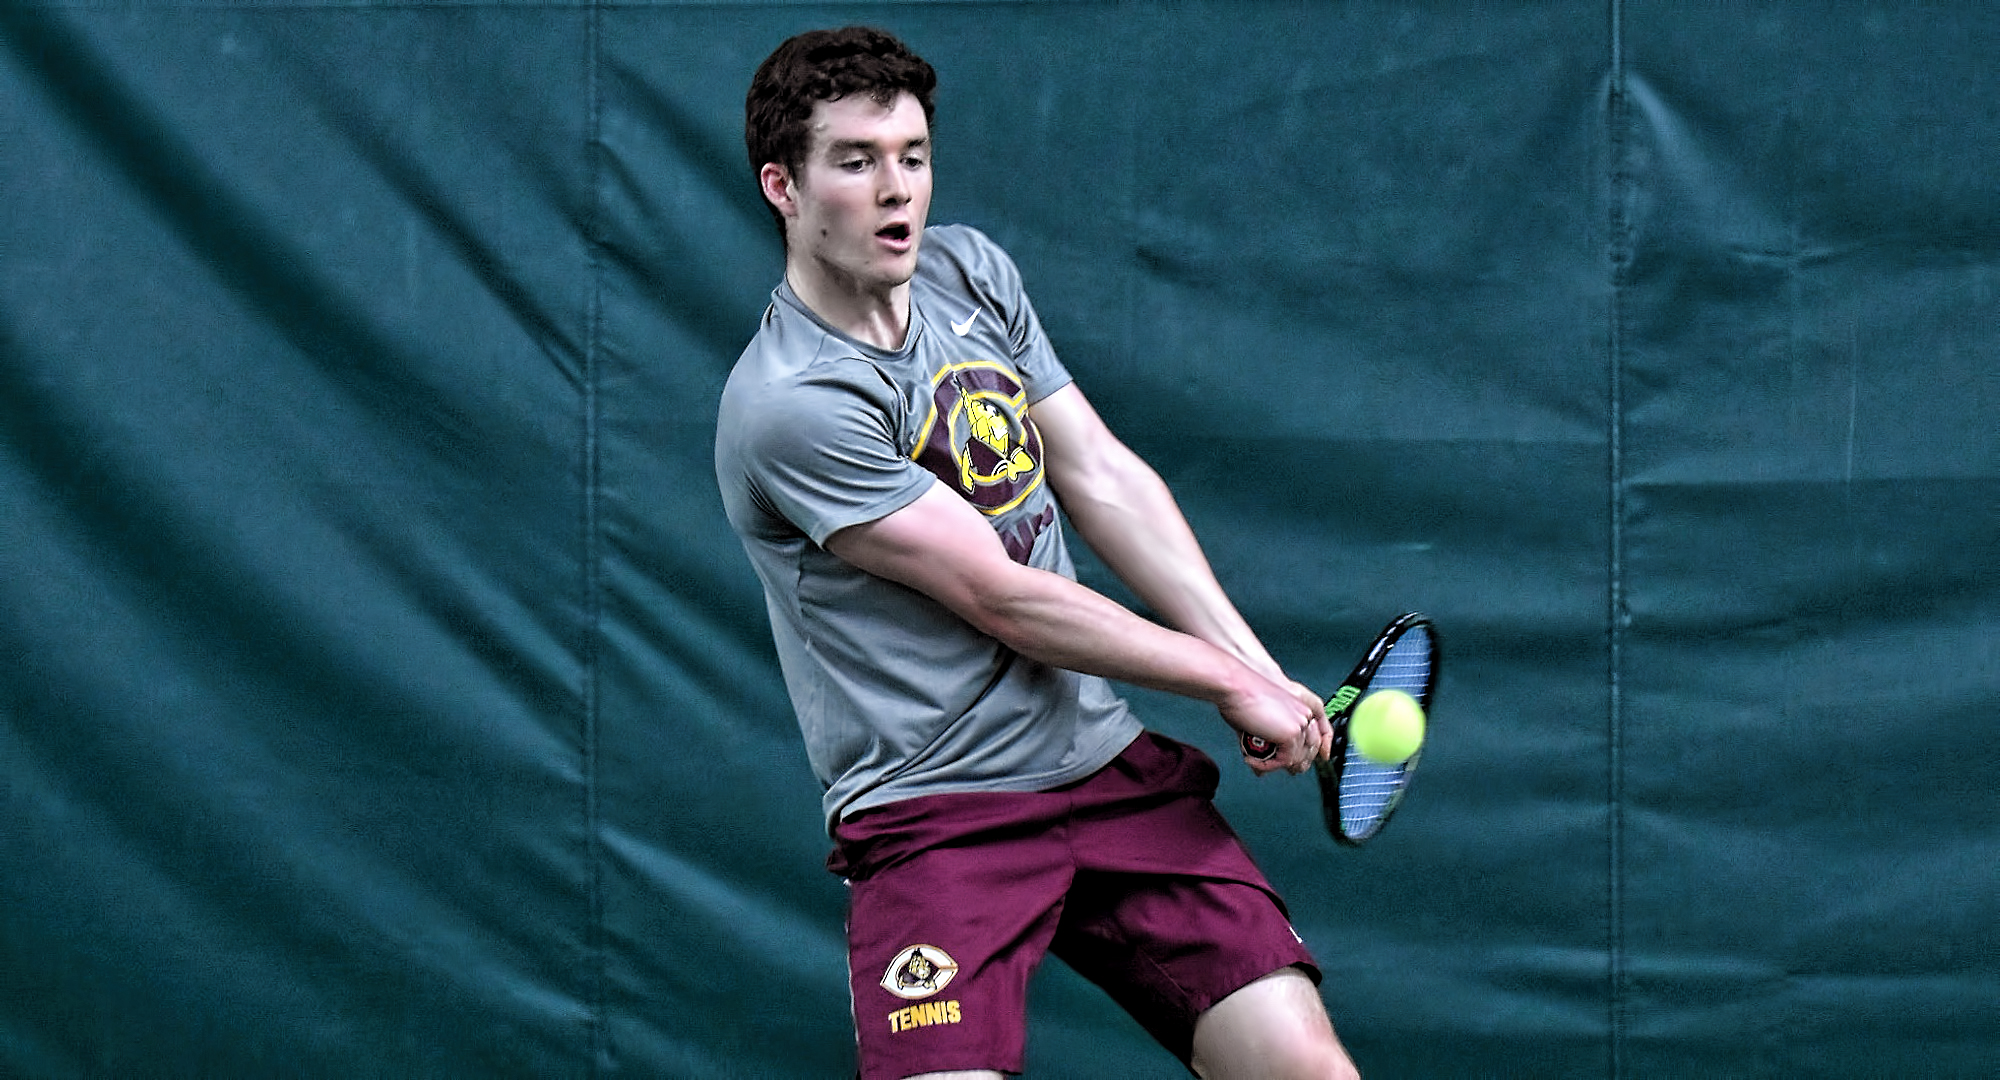 Junior Erik Porter eyes a backhand during his match at No.1 singles against St. Scholastica.